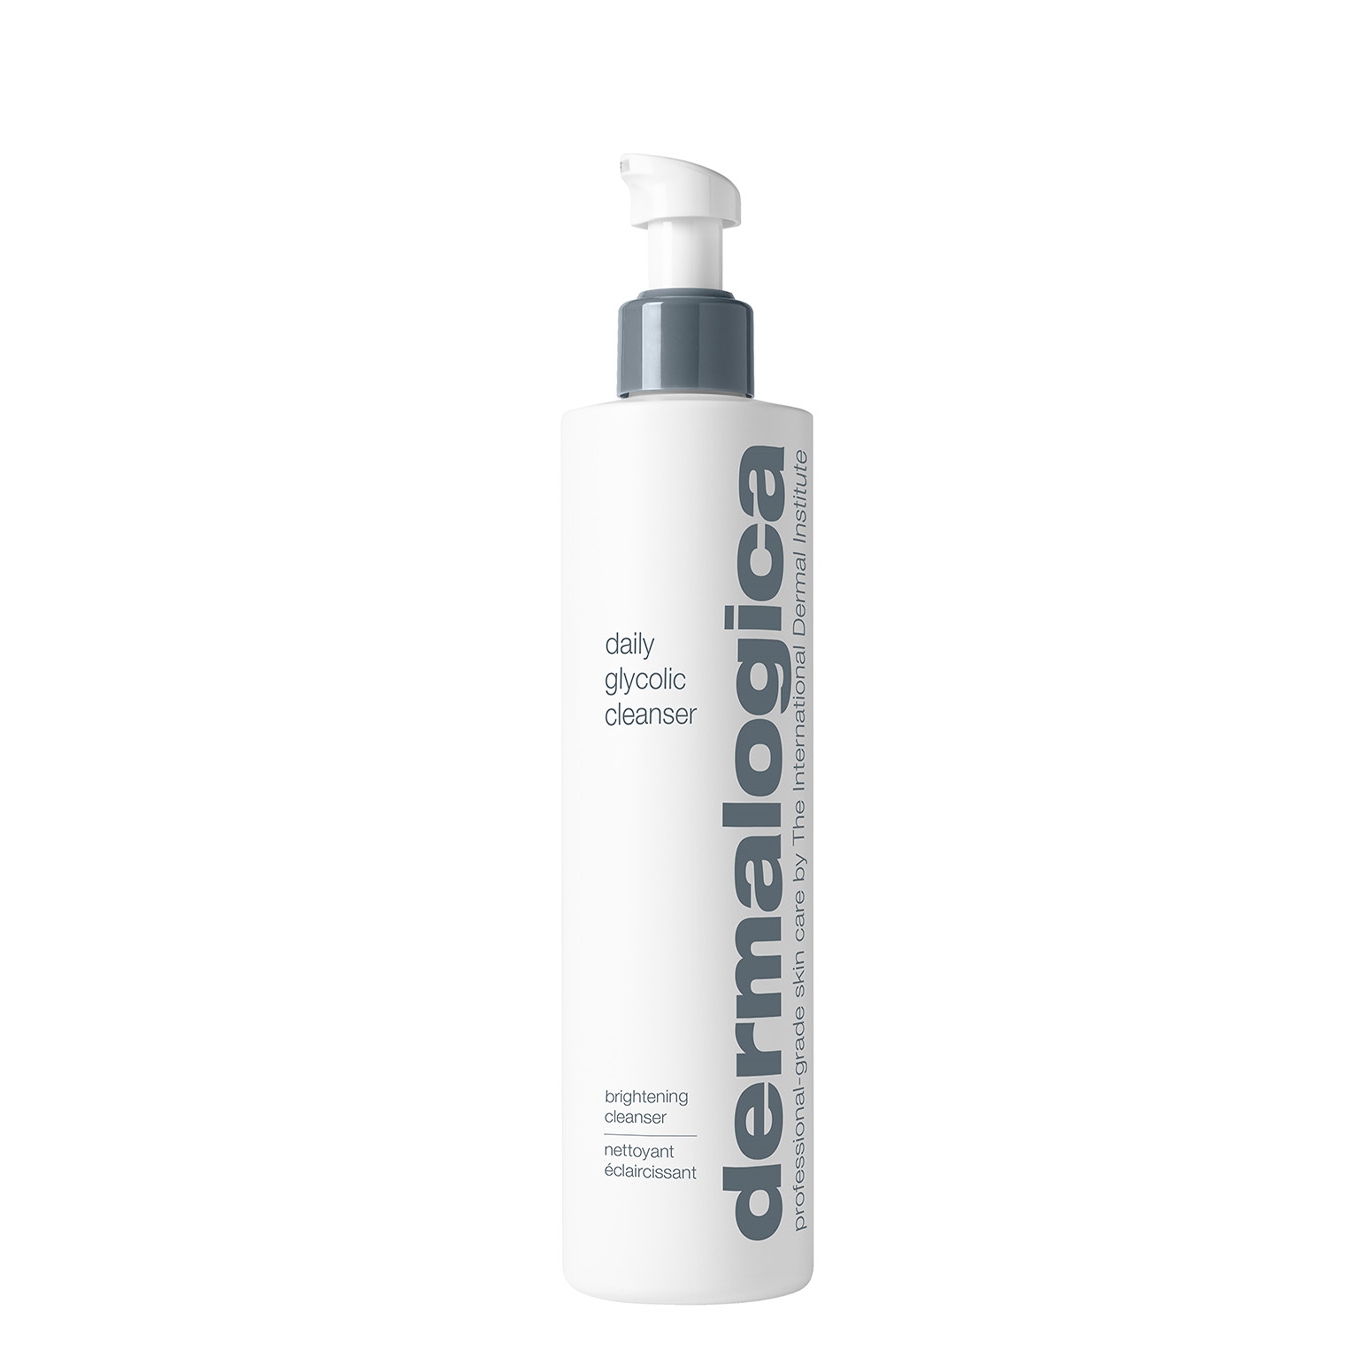 Daily Glycolic Cleanser 295ml, Facial Cleansers, Renews